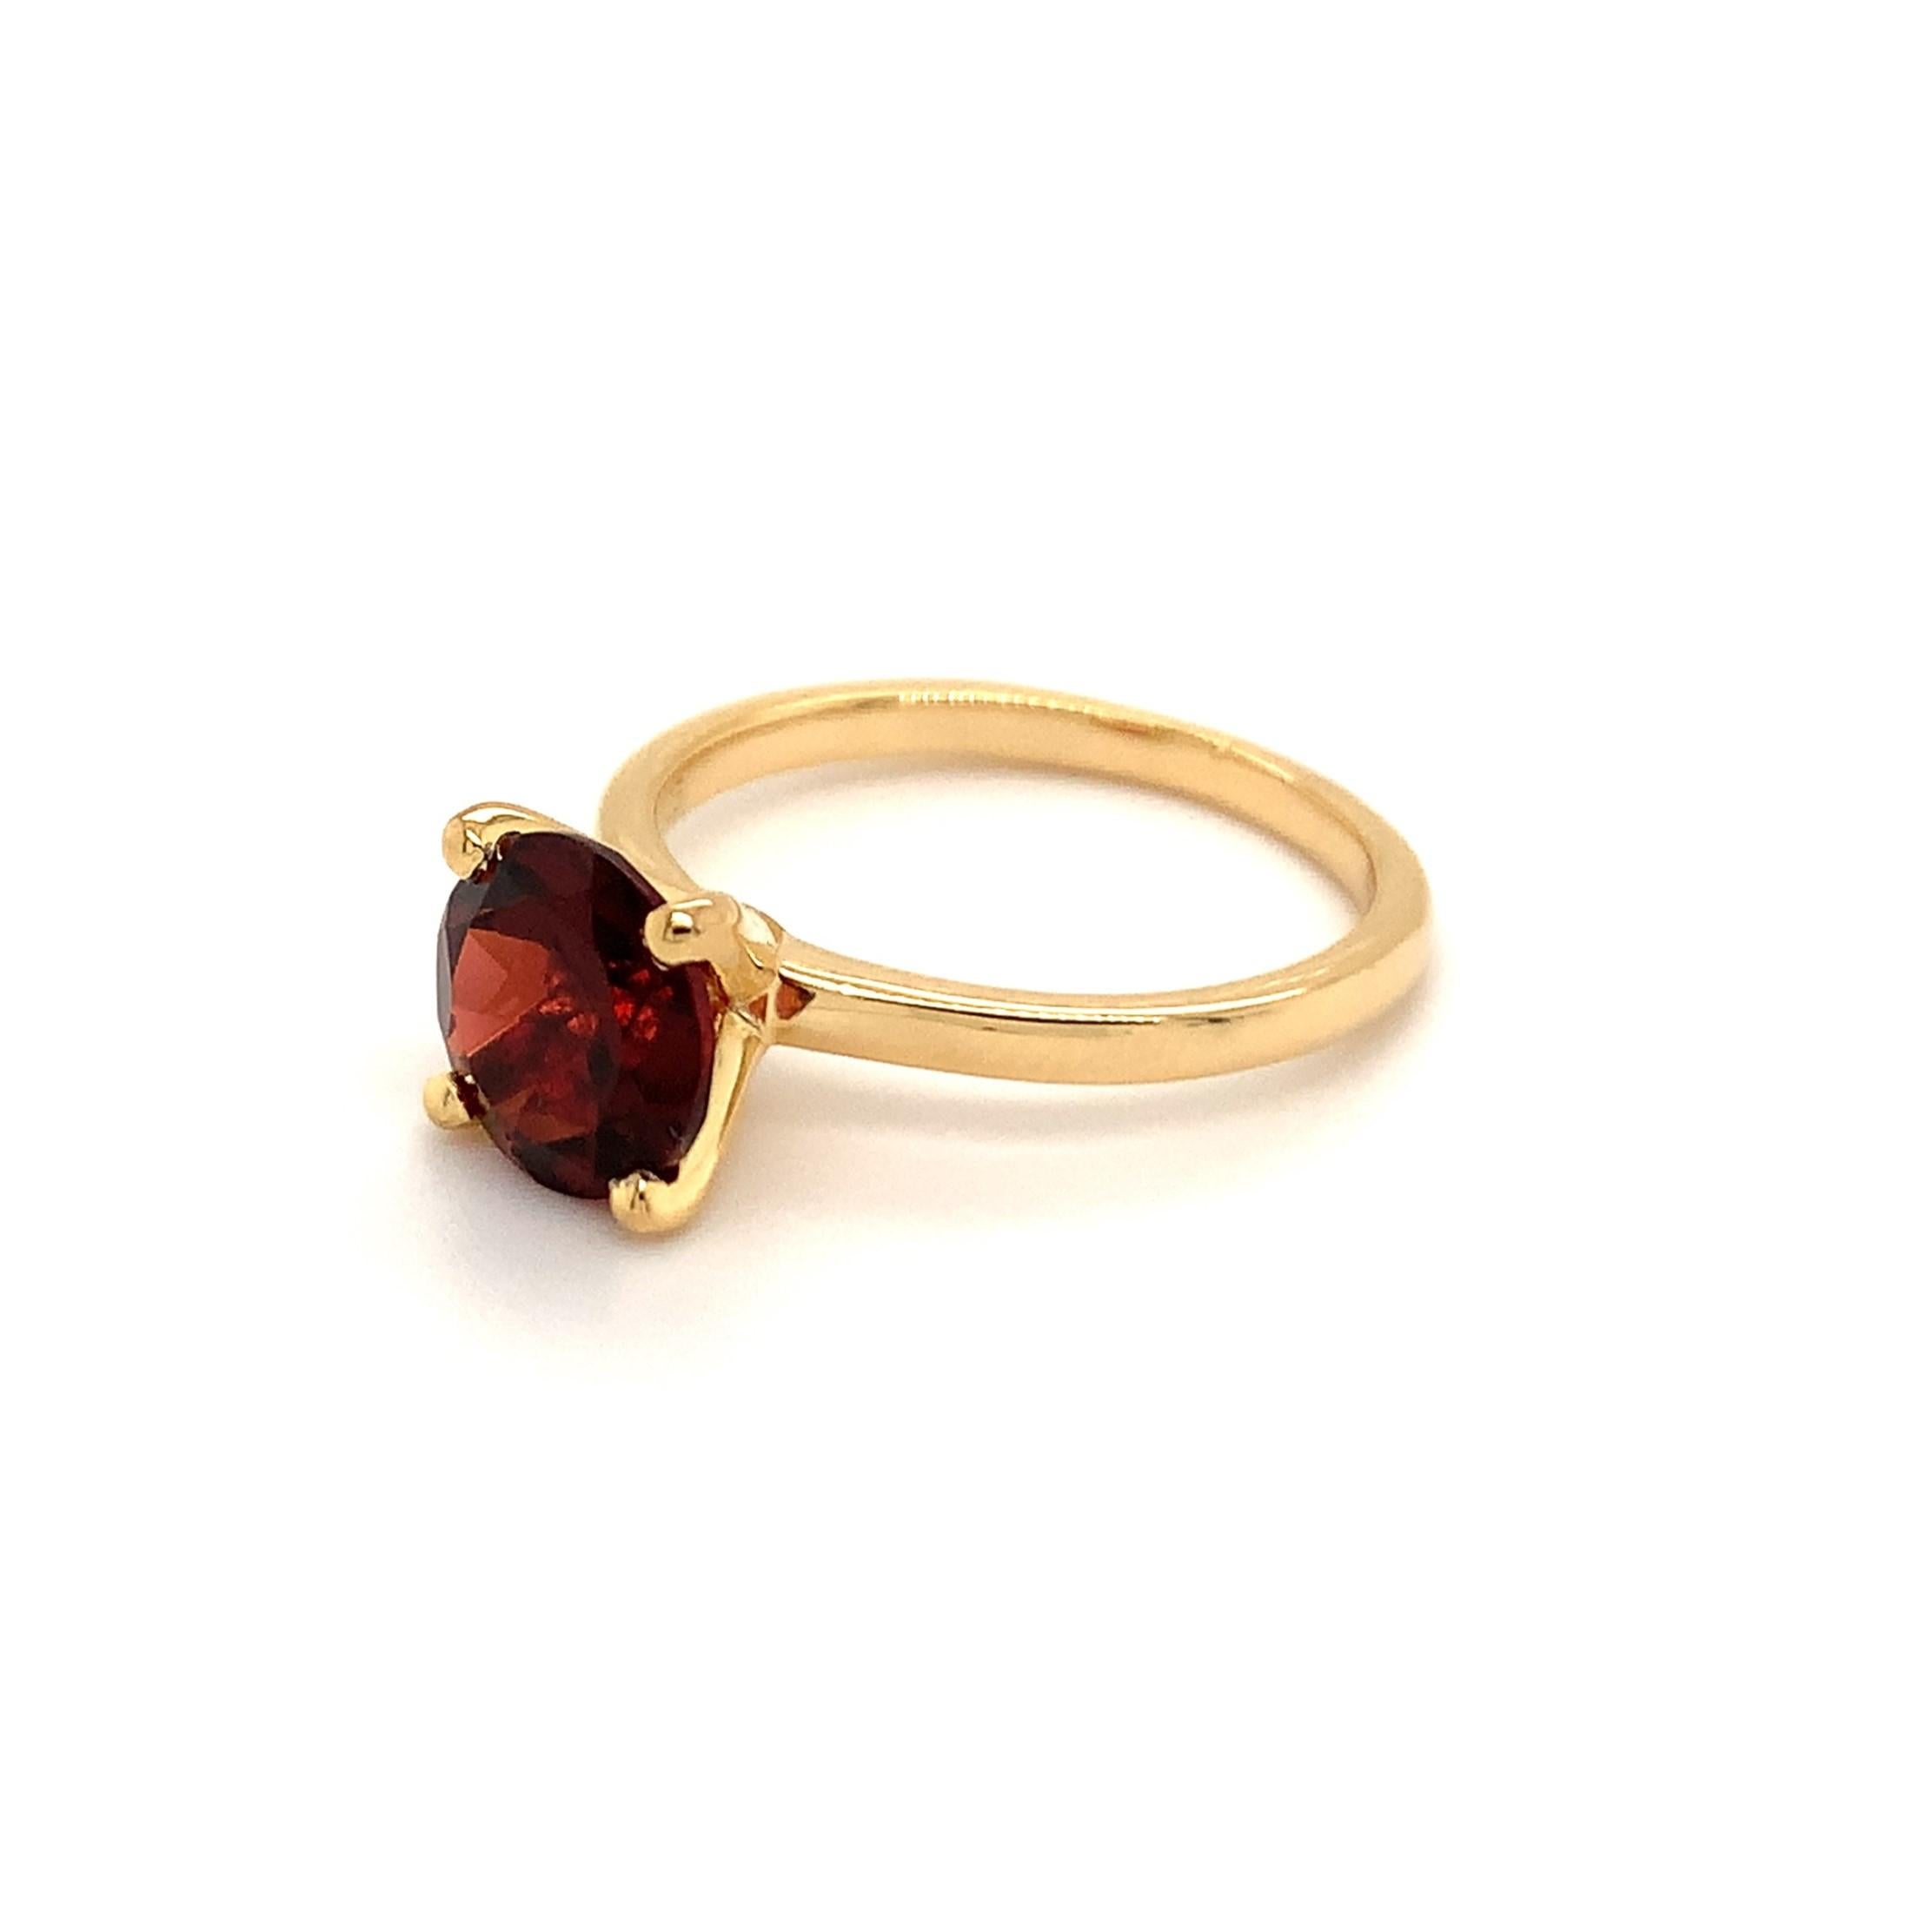 Round Shape Garnet Gemstone beautifully crafted in a Ring. A fiery Red Color January Birthstone. For a special occasion like Engagement or Proposal or may be as a gift for a special person.

Primary Stone Size - 8x8mm